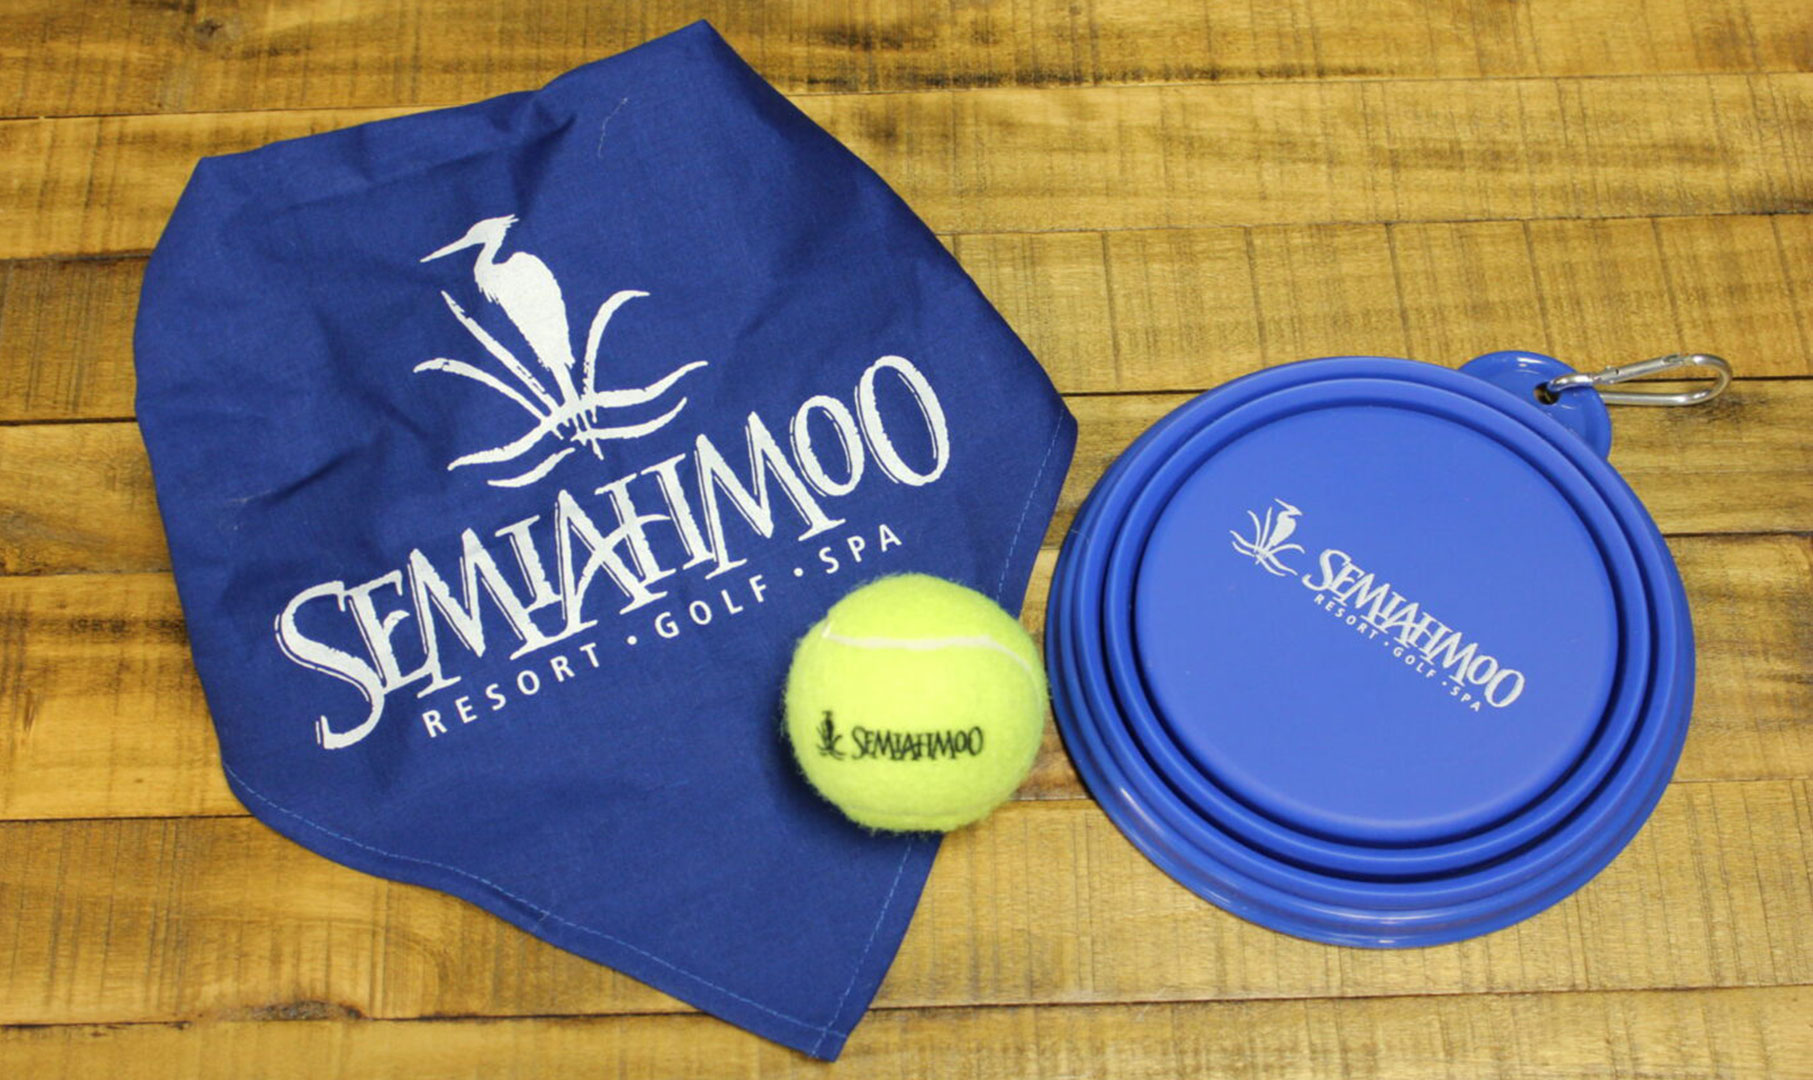 Blue dog bandana, tennis ball and collapsible water bowl with Semiahmoo logo on it.